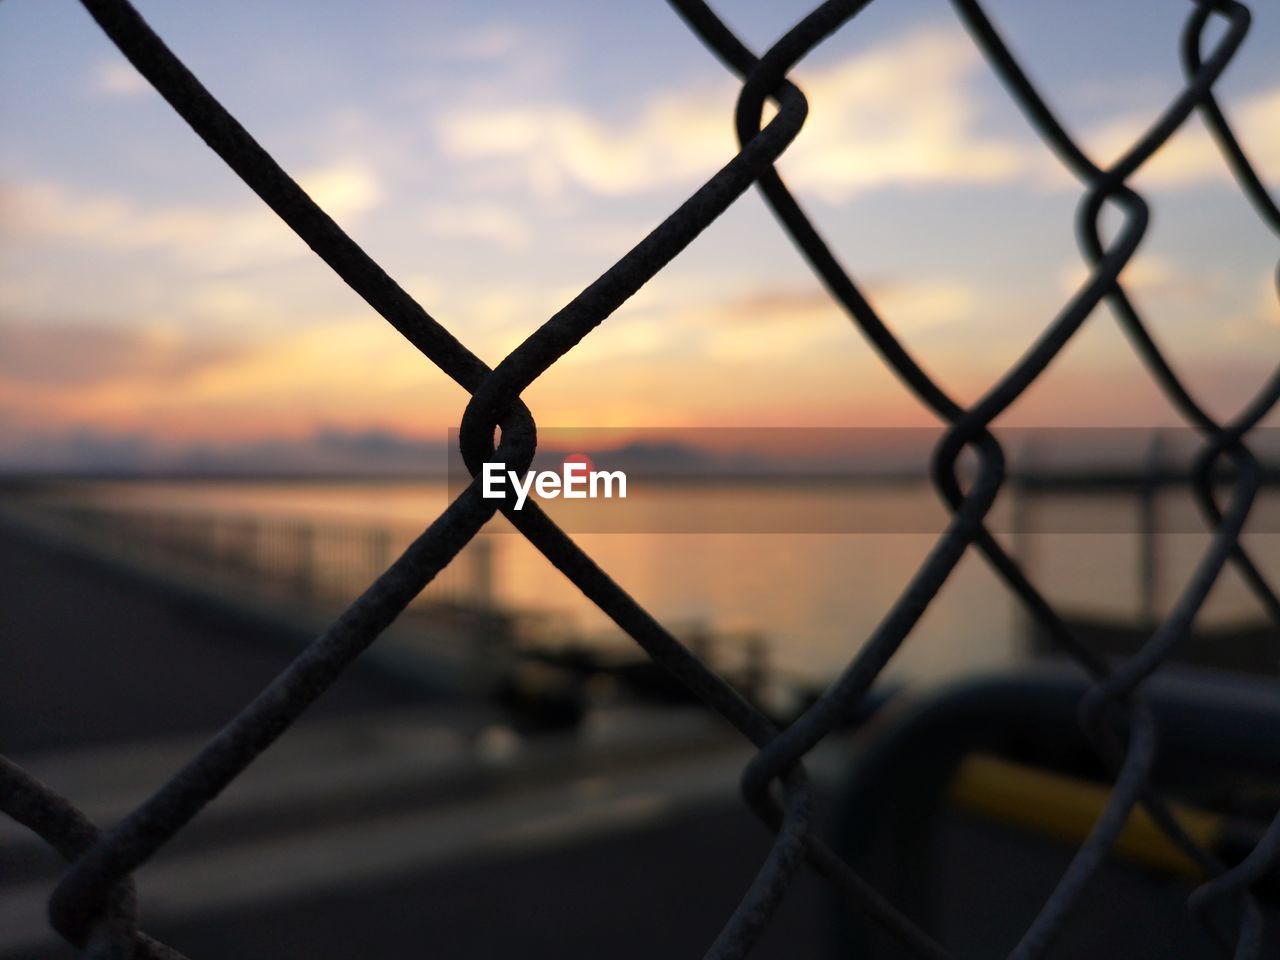 CLOSE-UP OF CHAINLINK FENCE AGAINST SUNSET SKY